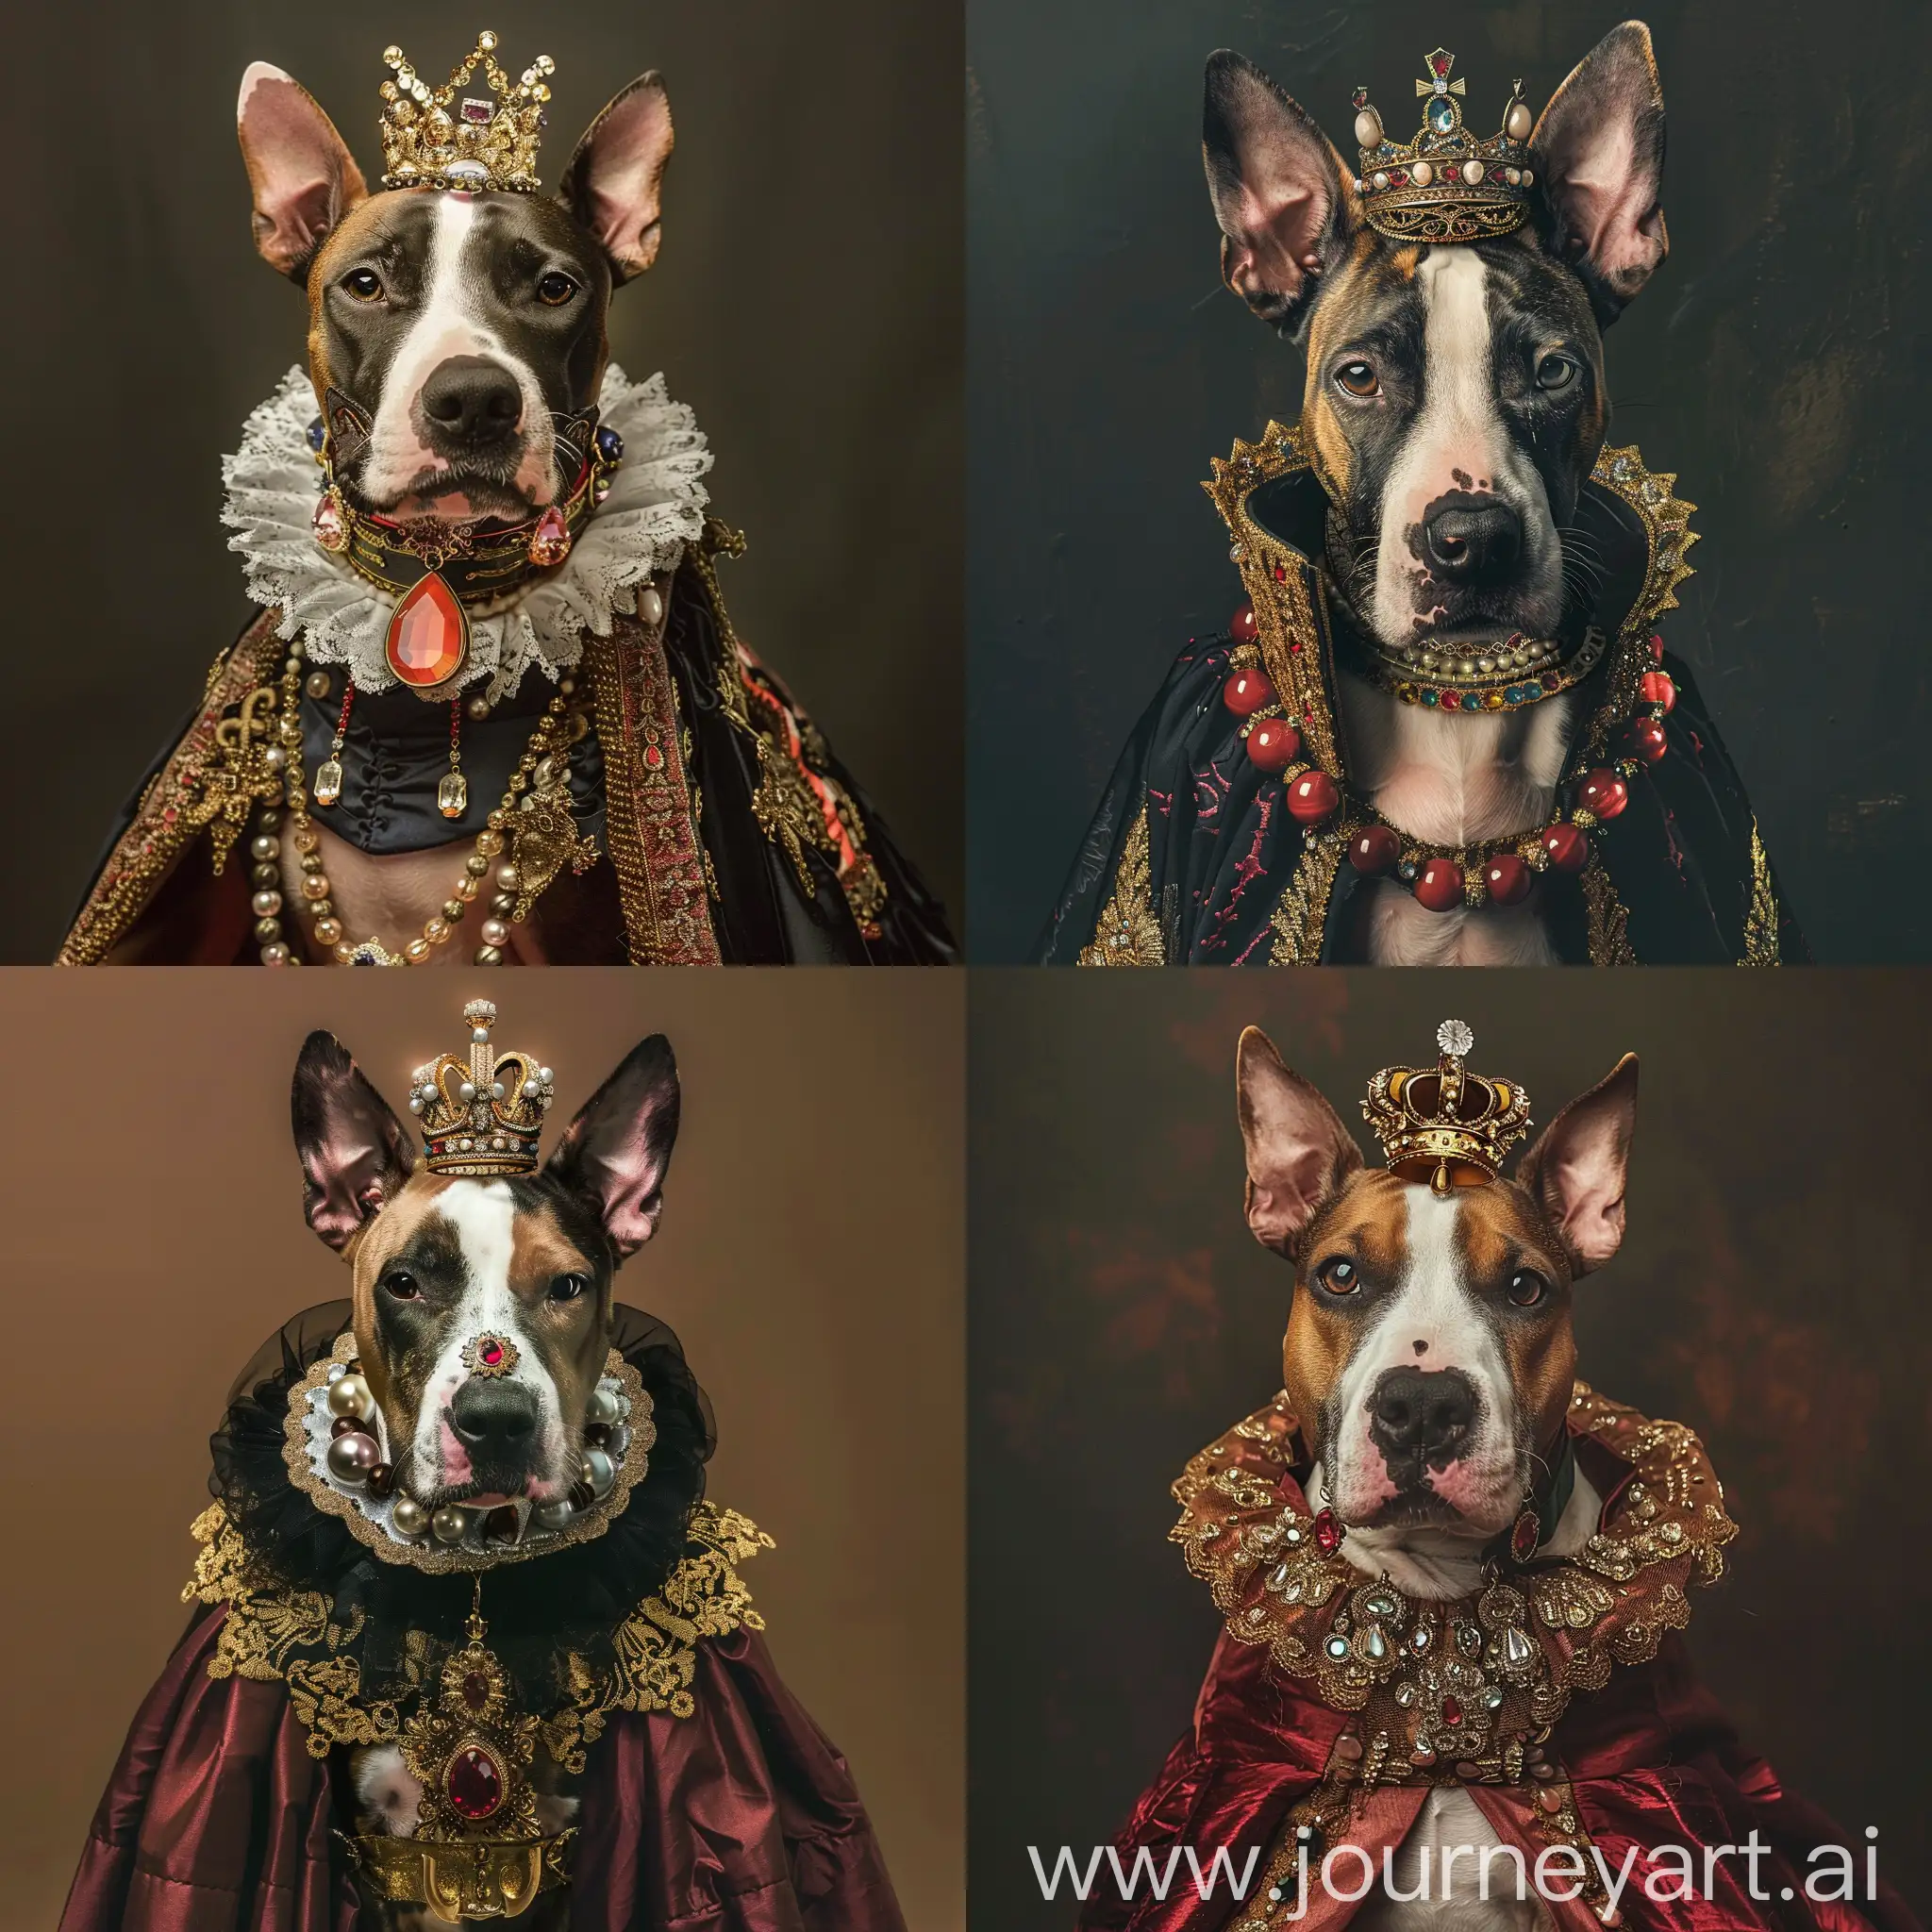 Regal-TriColored-English-Bull-Terrier-Dressed-as-Victorian-Queen-with-Jewels-and-Crown